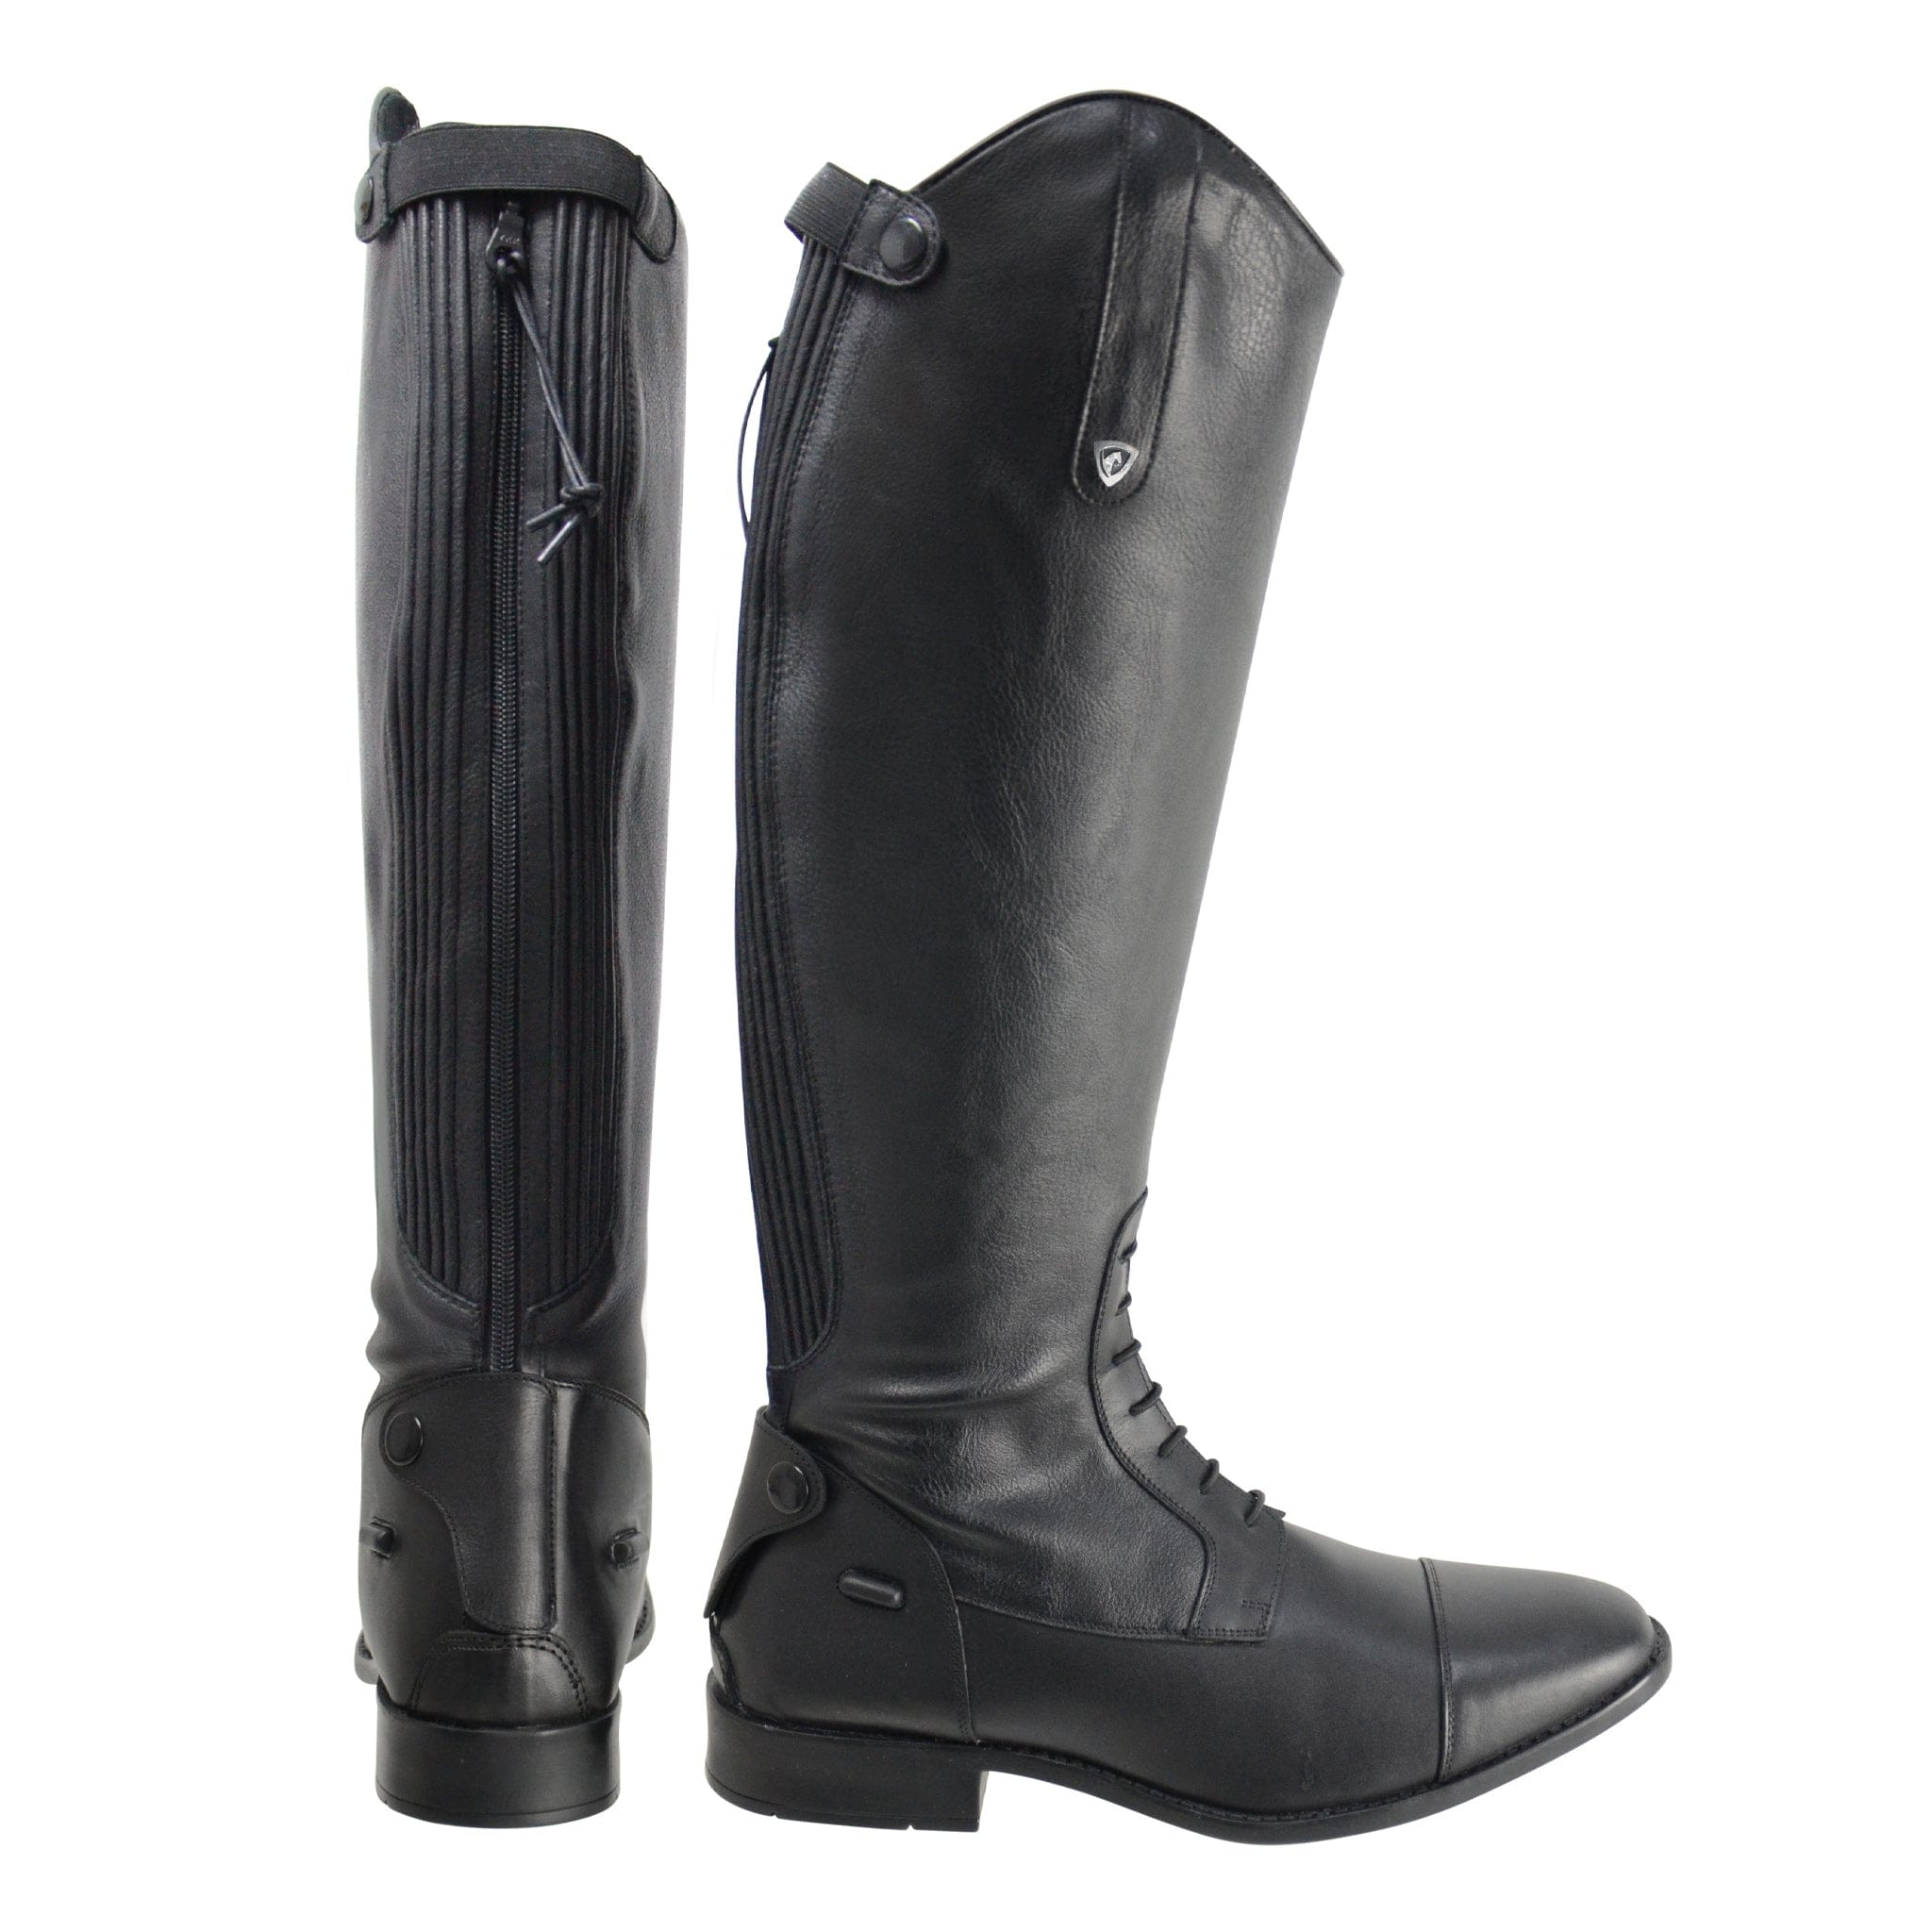 Hy Equestrian Tuscan Field Riding Boots 24410 Black Pair